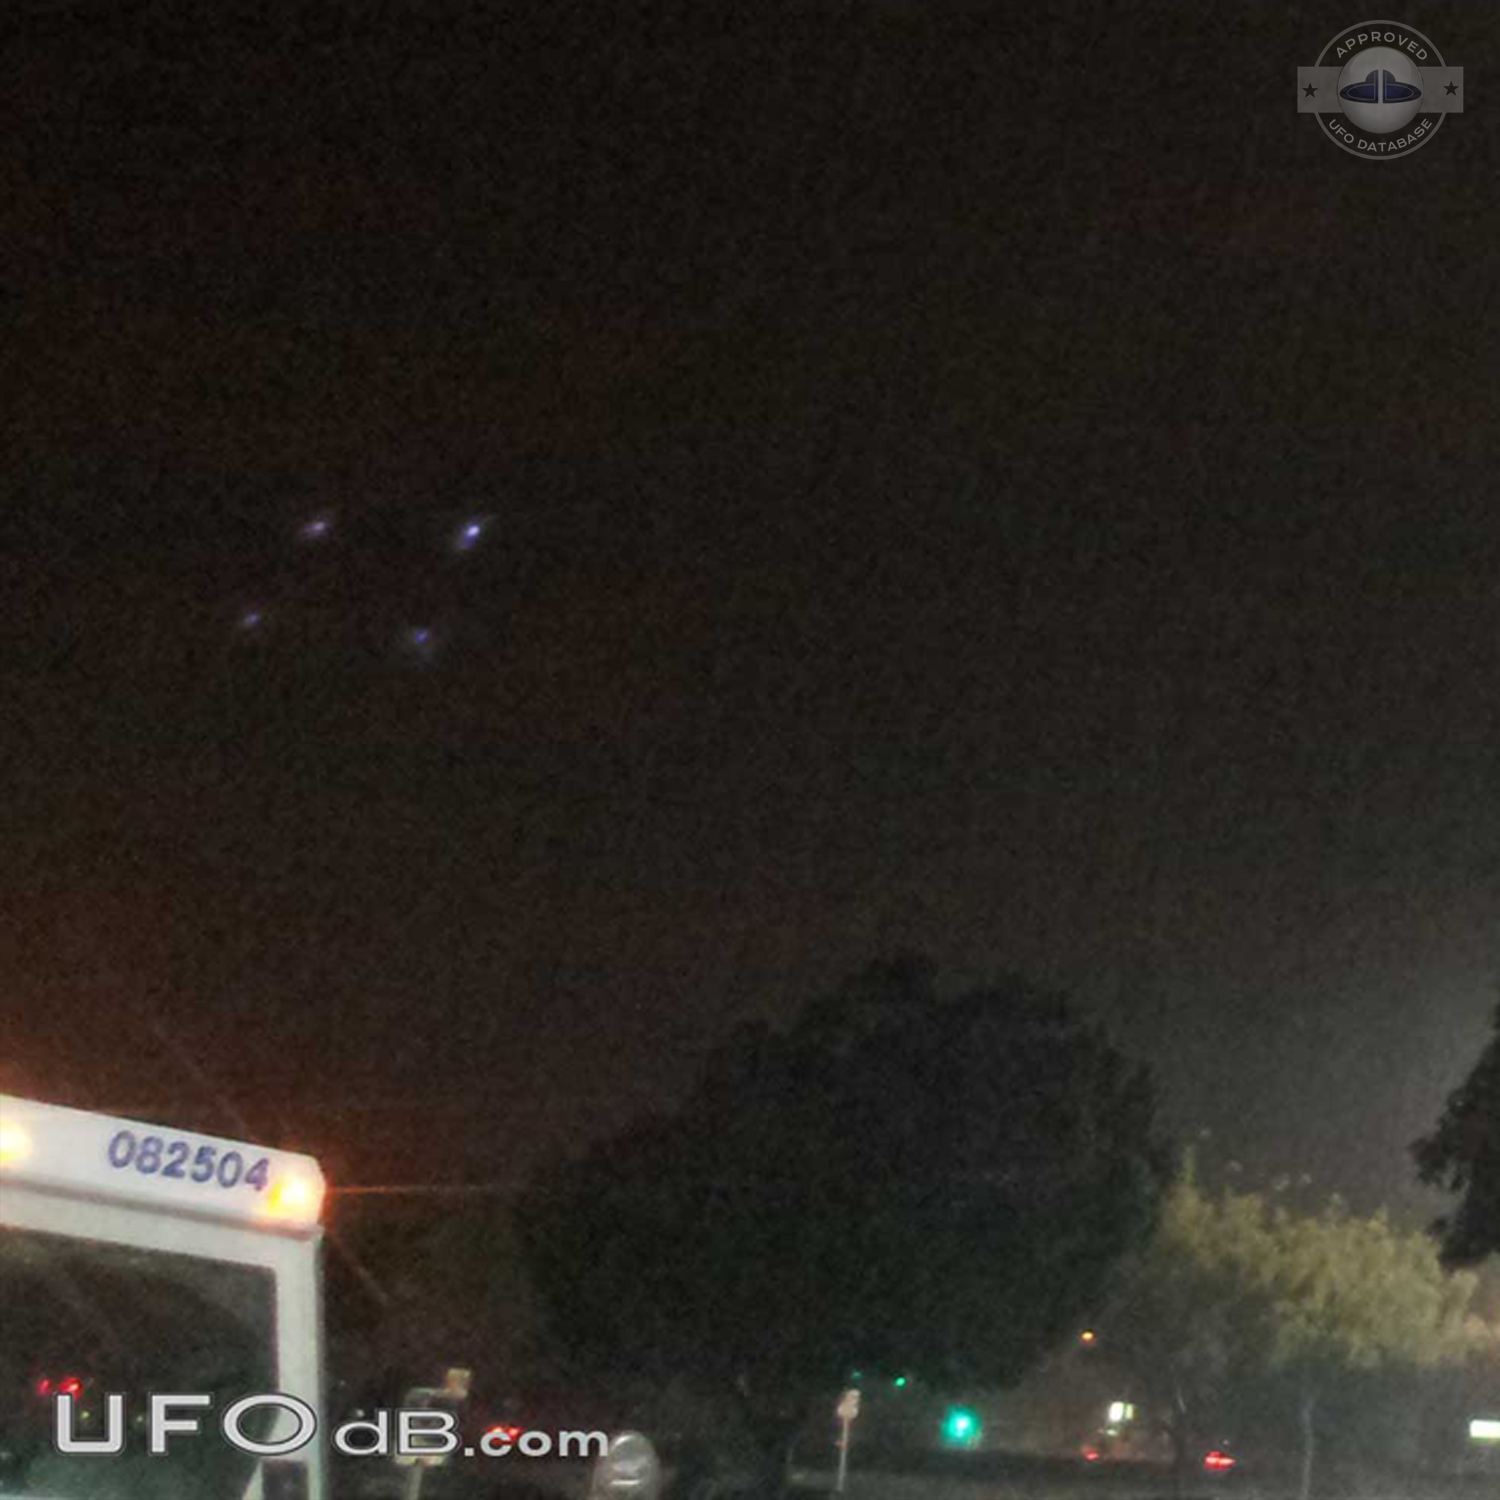 Square shaped UFO caught on picture during heavy rainfall - Rialto CA UFO Picture #384-6